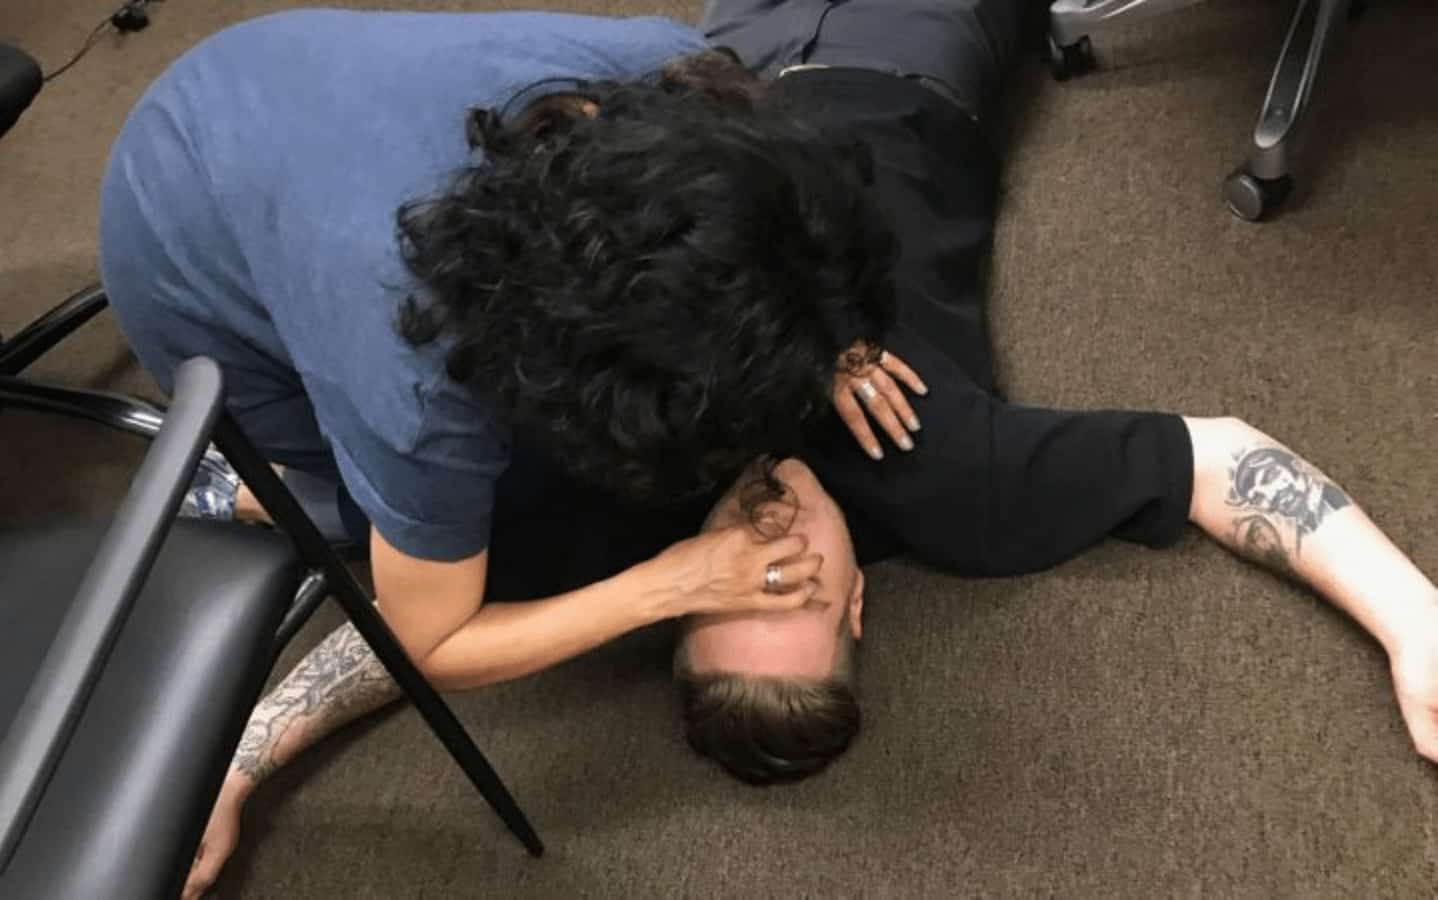 woman administering cpr to man who overdosed on drugs